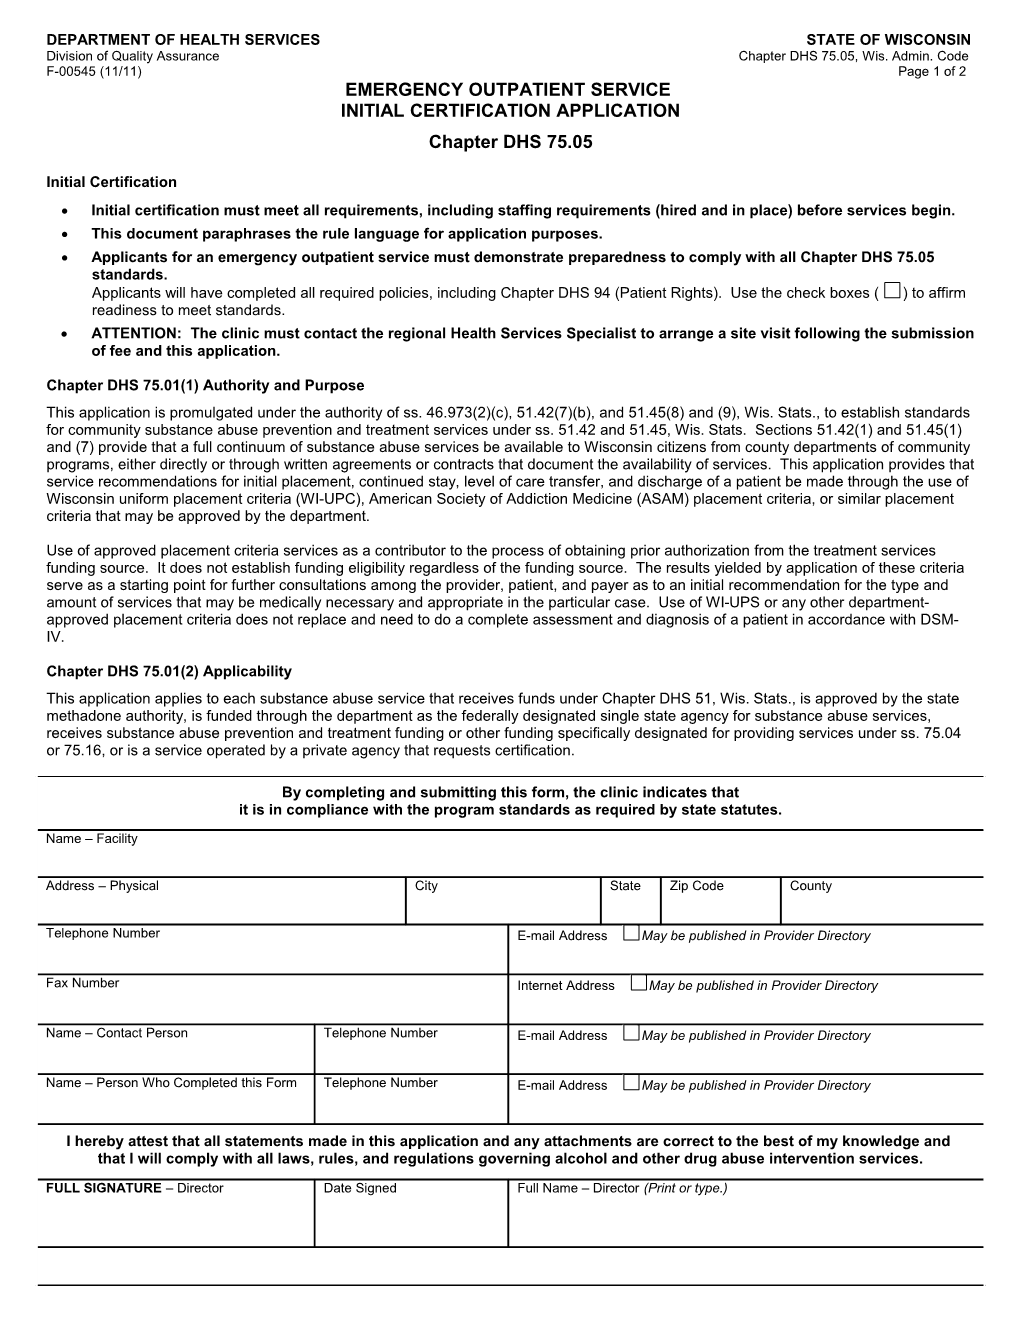 Emergency Outpatient Service Initial Certification Application-DHS 75.05, F-00545